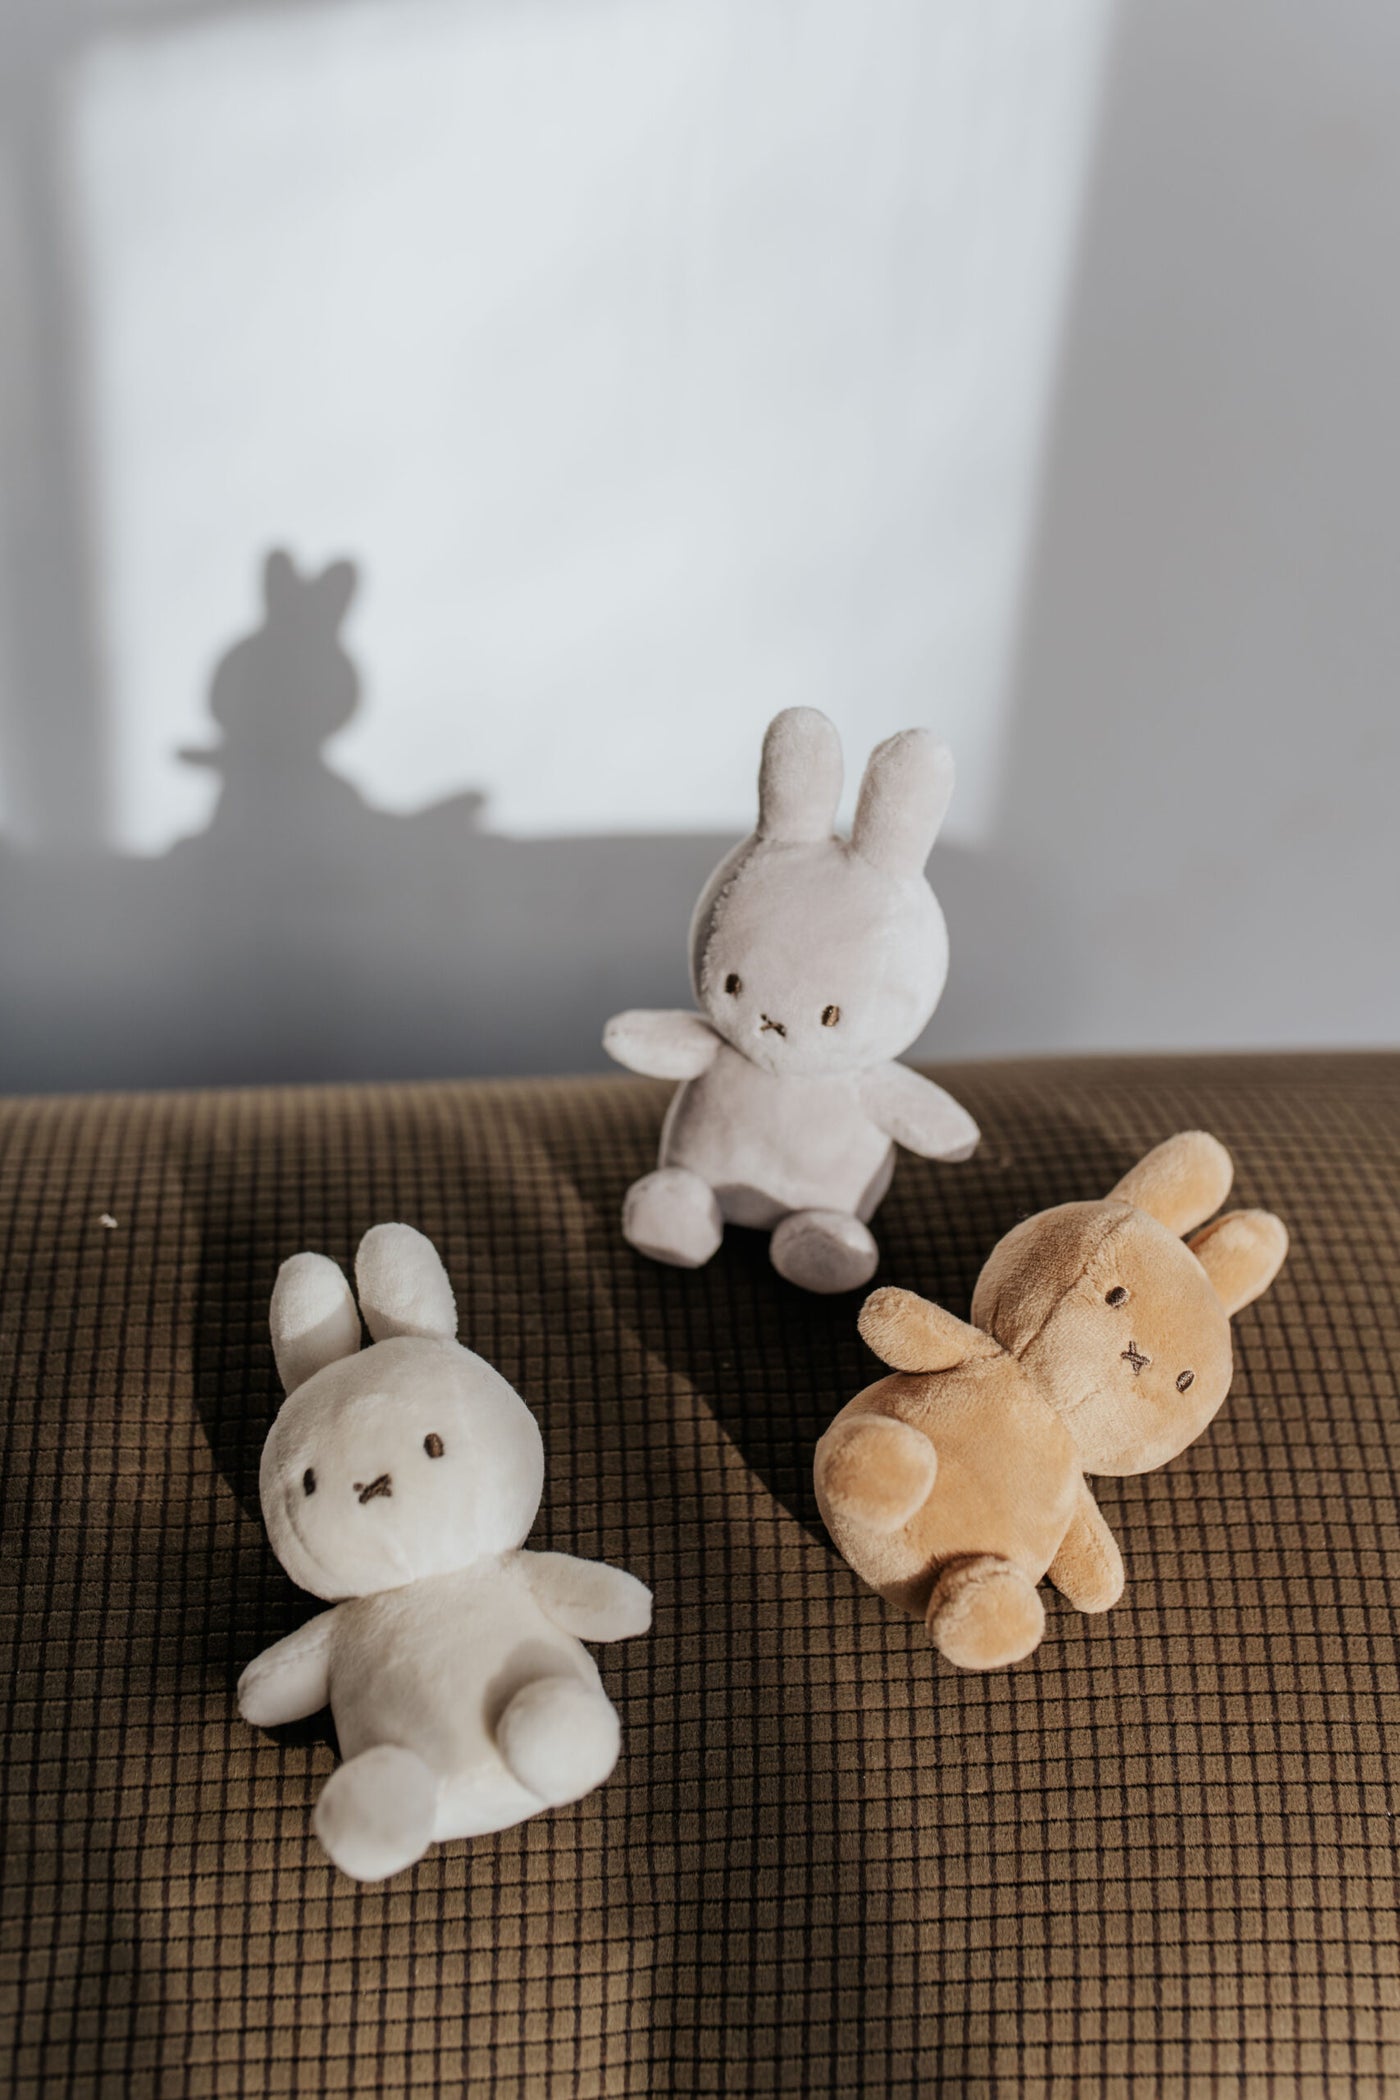 Lucky Miffy Sitting Grey in giftbox